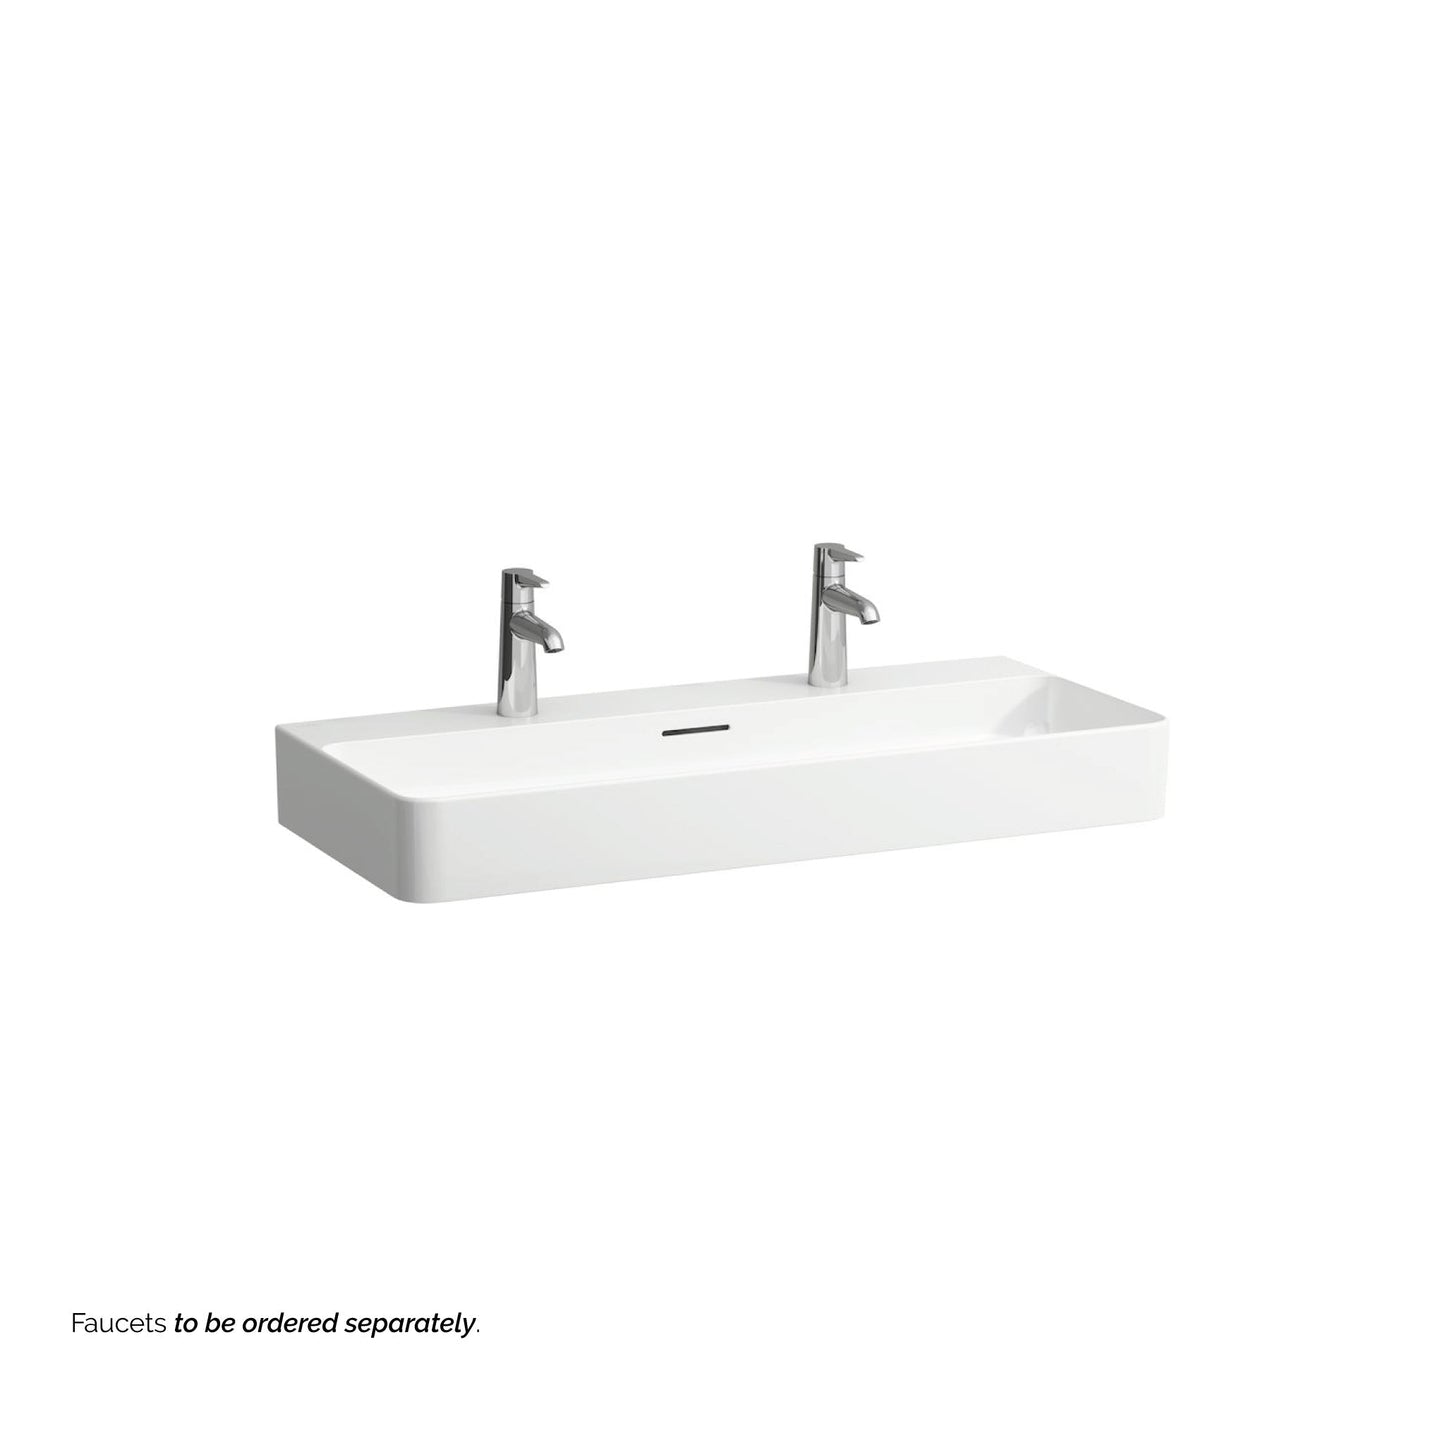 Laufen Val 37" x 17" White Ceramic Countertop Trough Bathroom Sink With 2 Faucet Holes